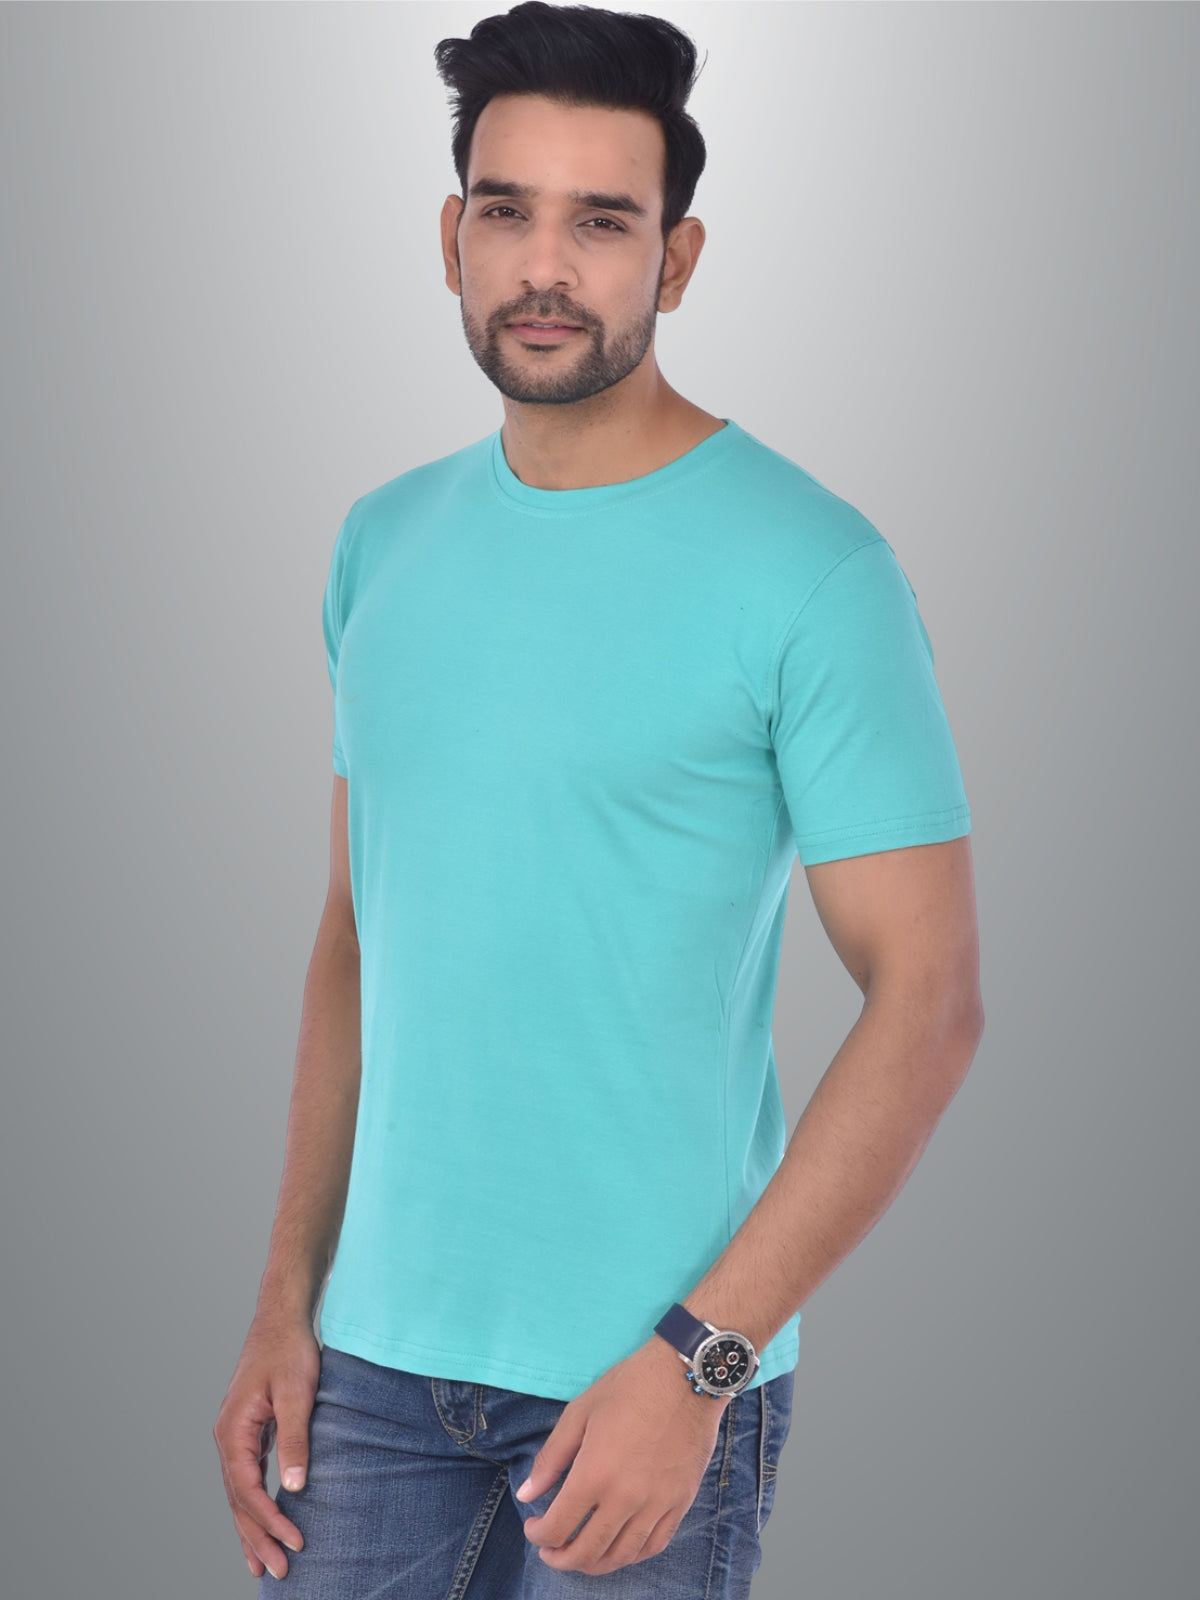 Mens Solid Round Neck  Half Sleeve Cotton Blend Turquoise T-shirt